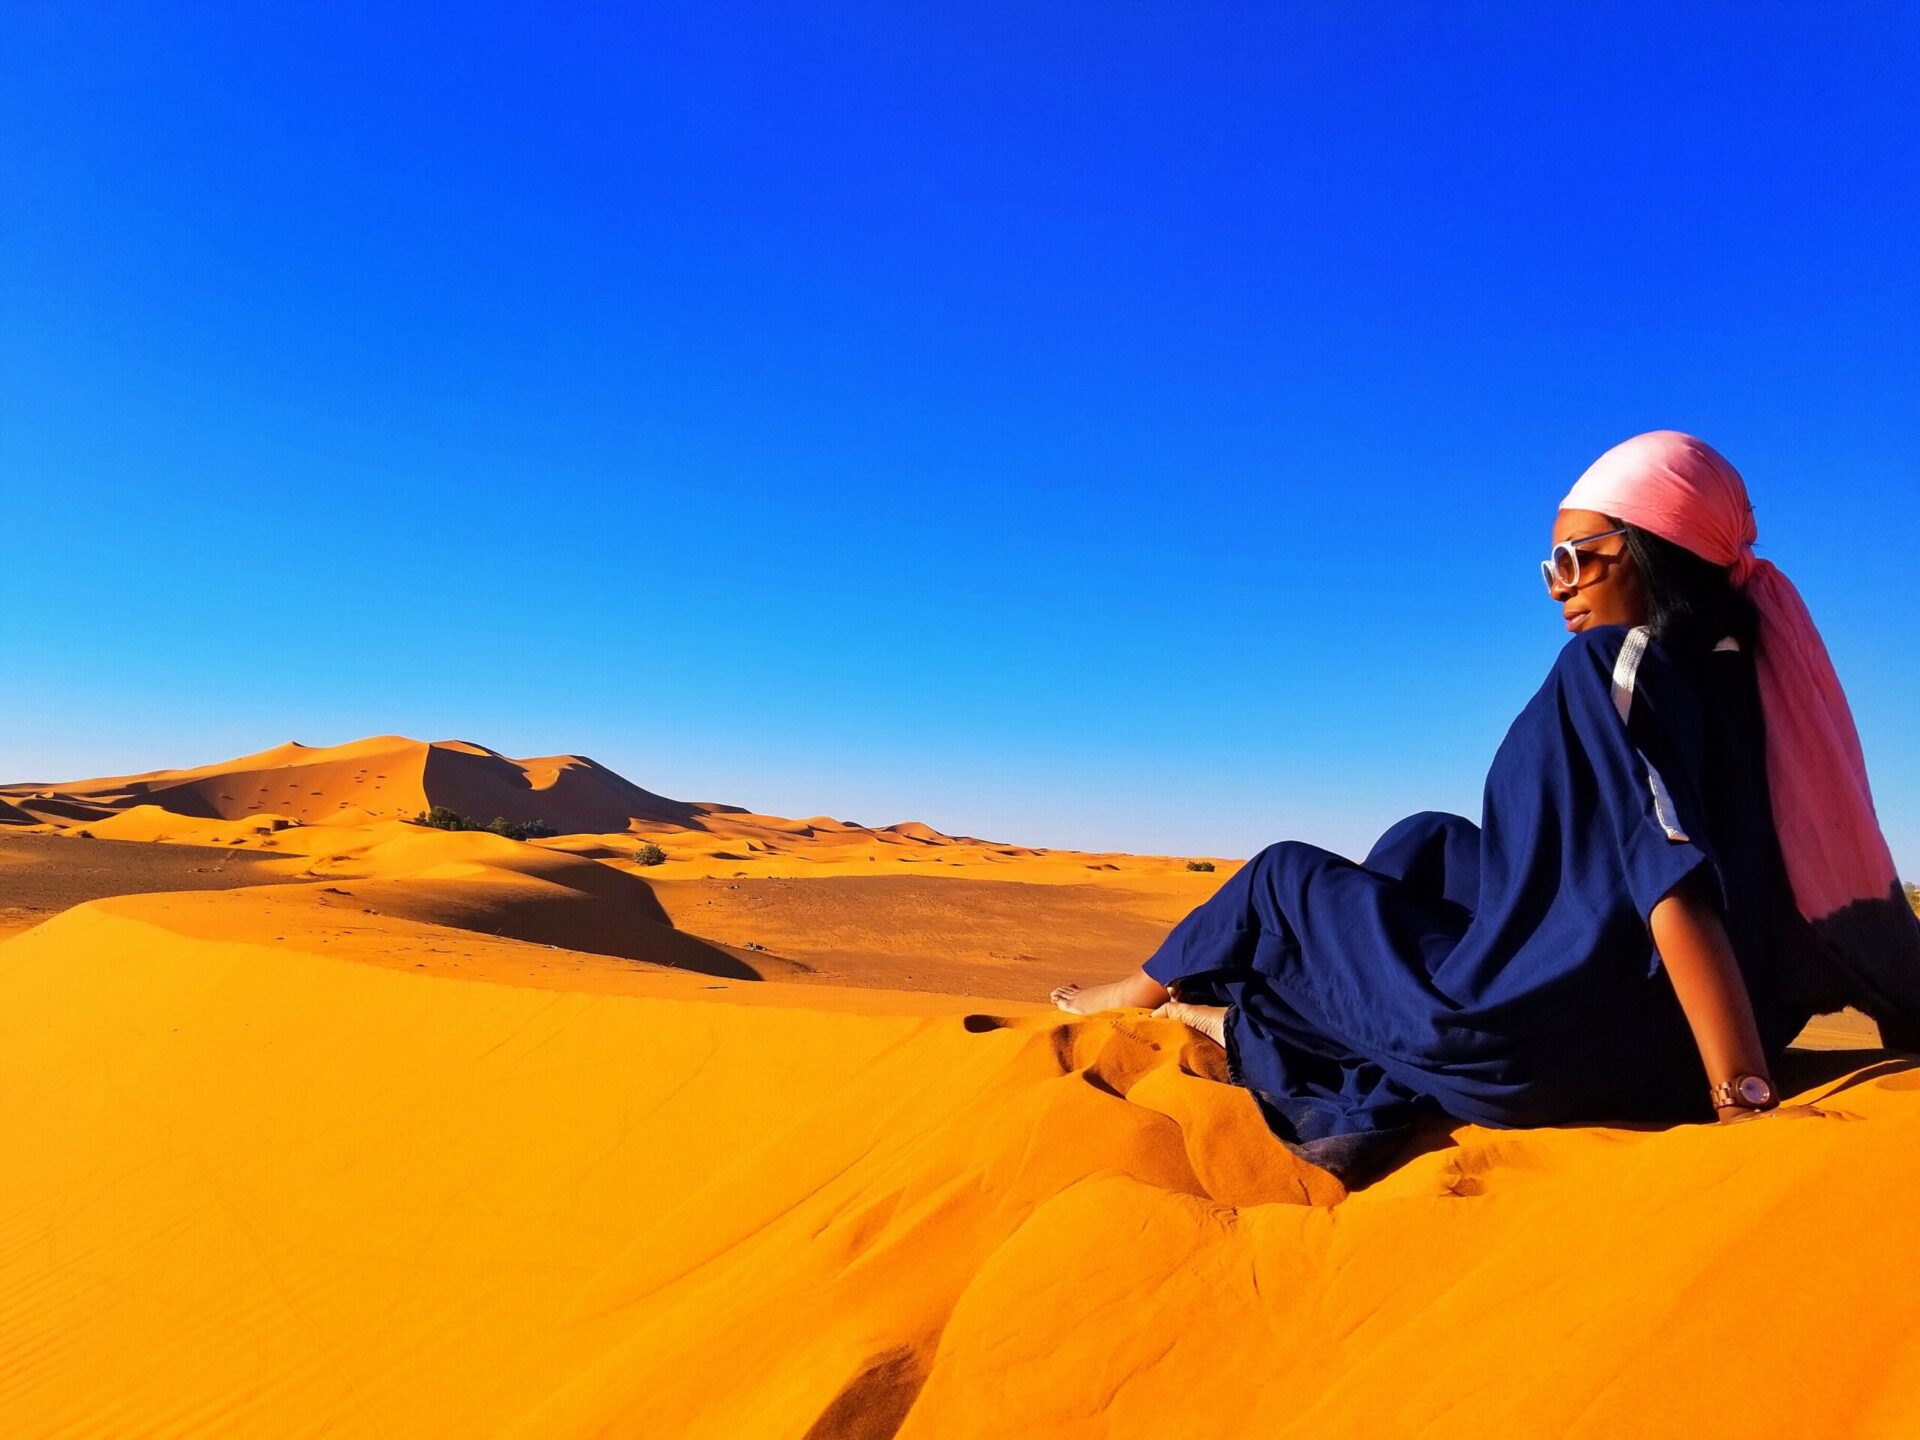 Attire Guide for Visitors to the Sahara Desert